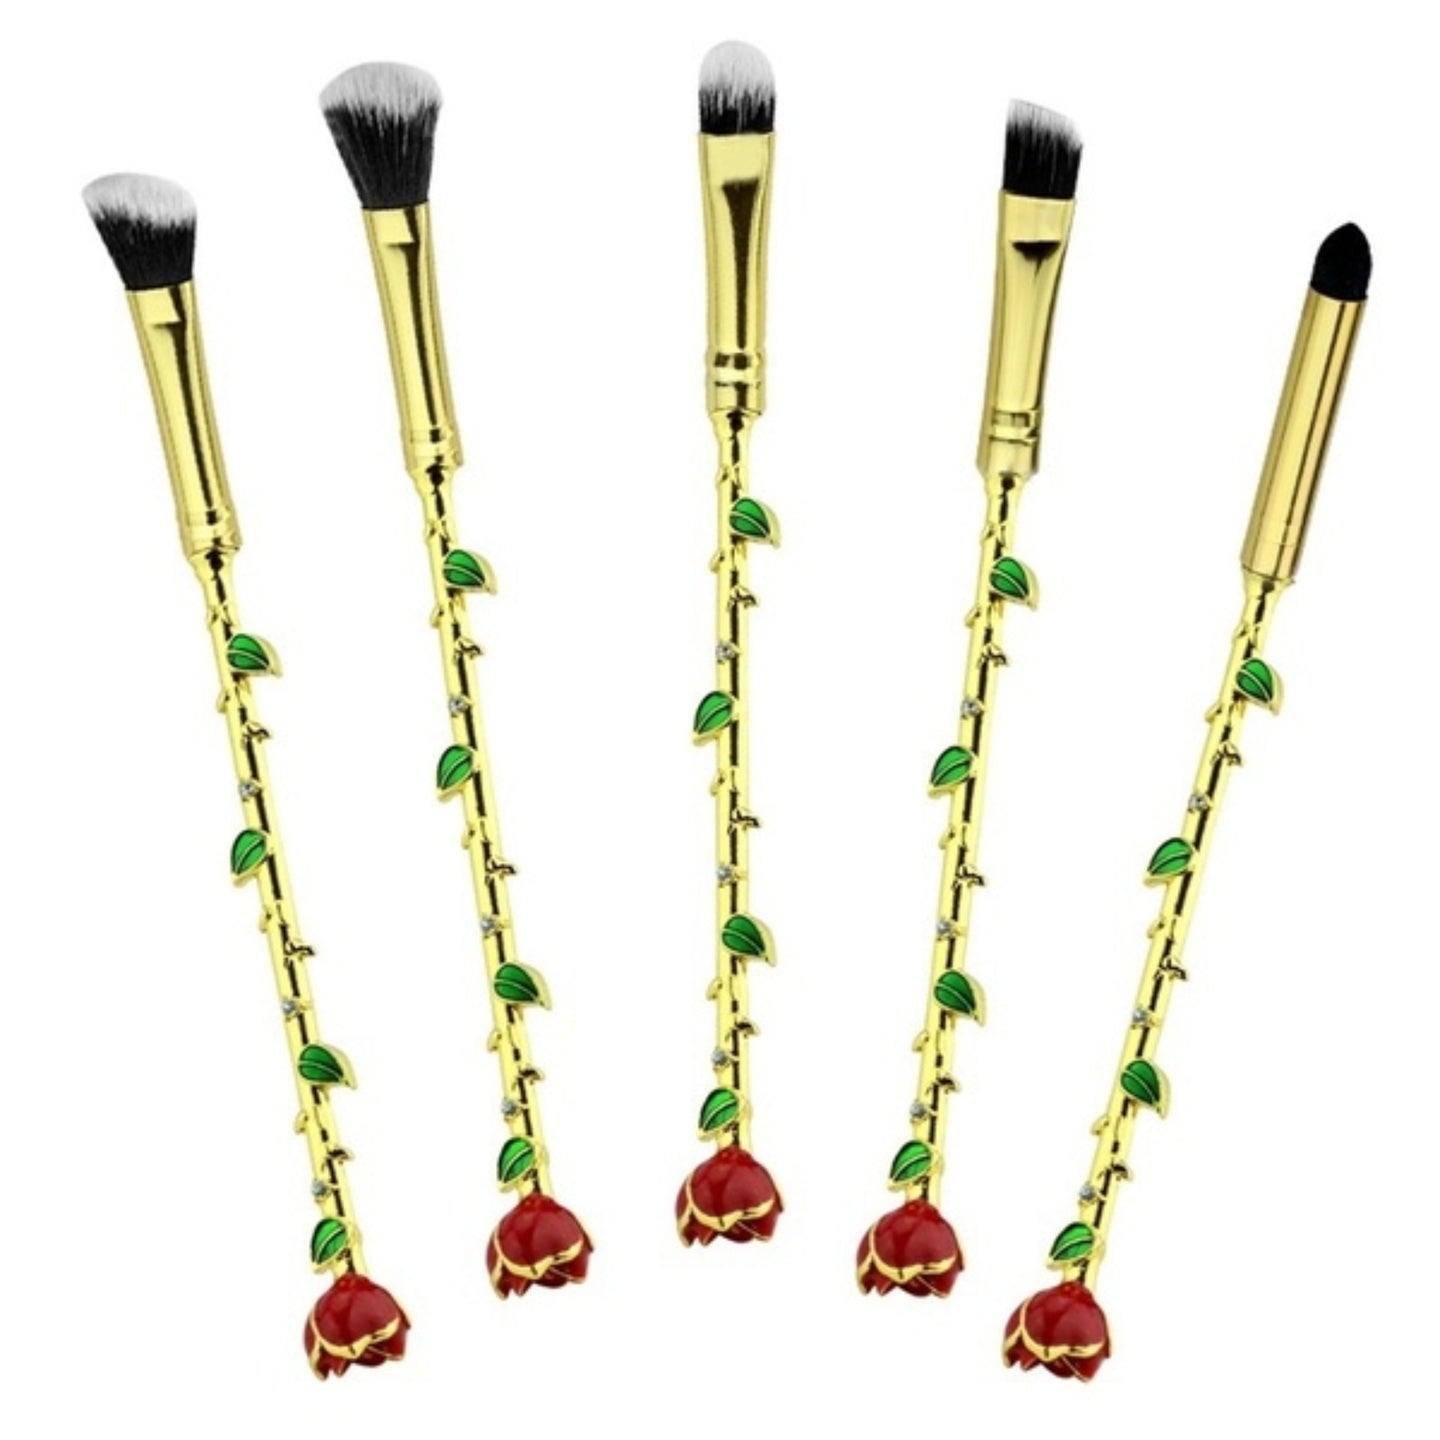 Beauty and the Beast Makeup Brushes